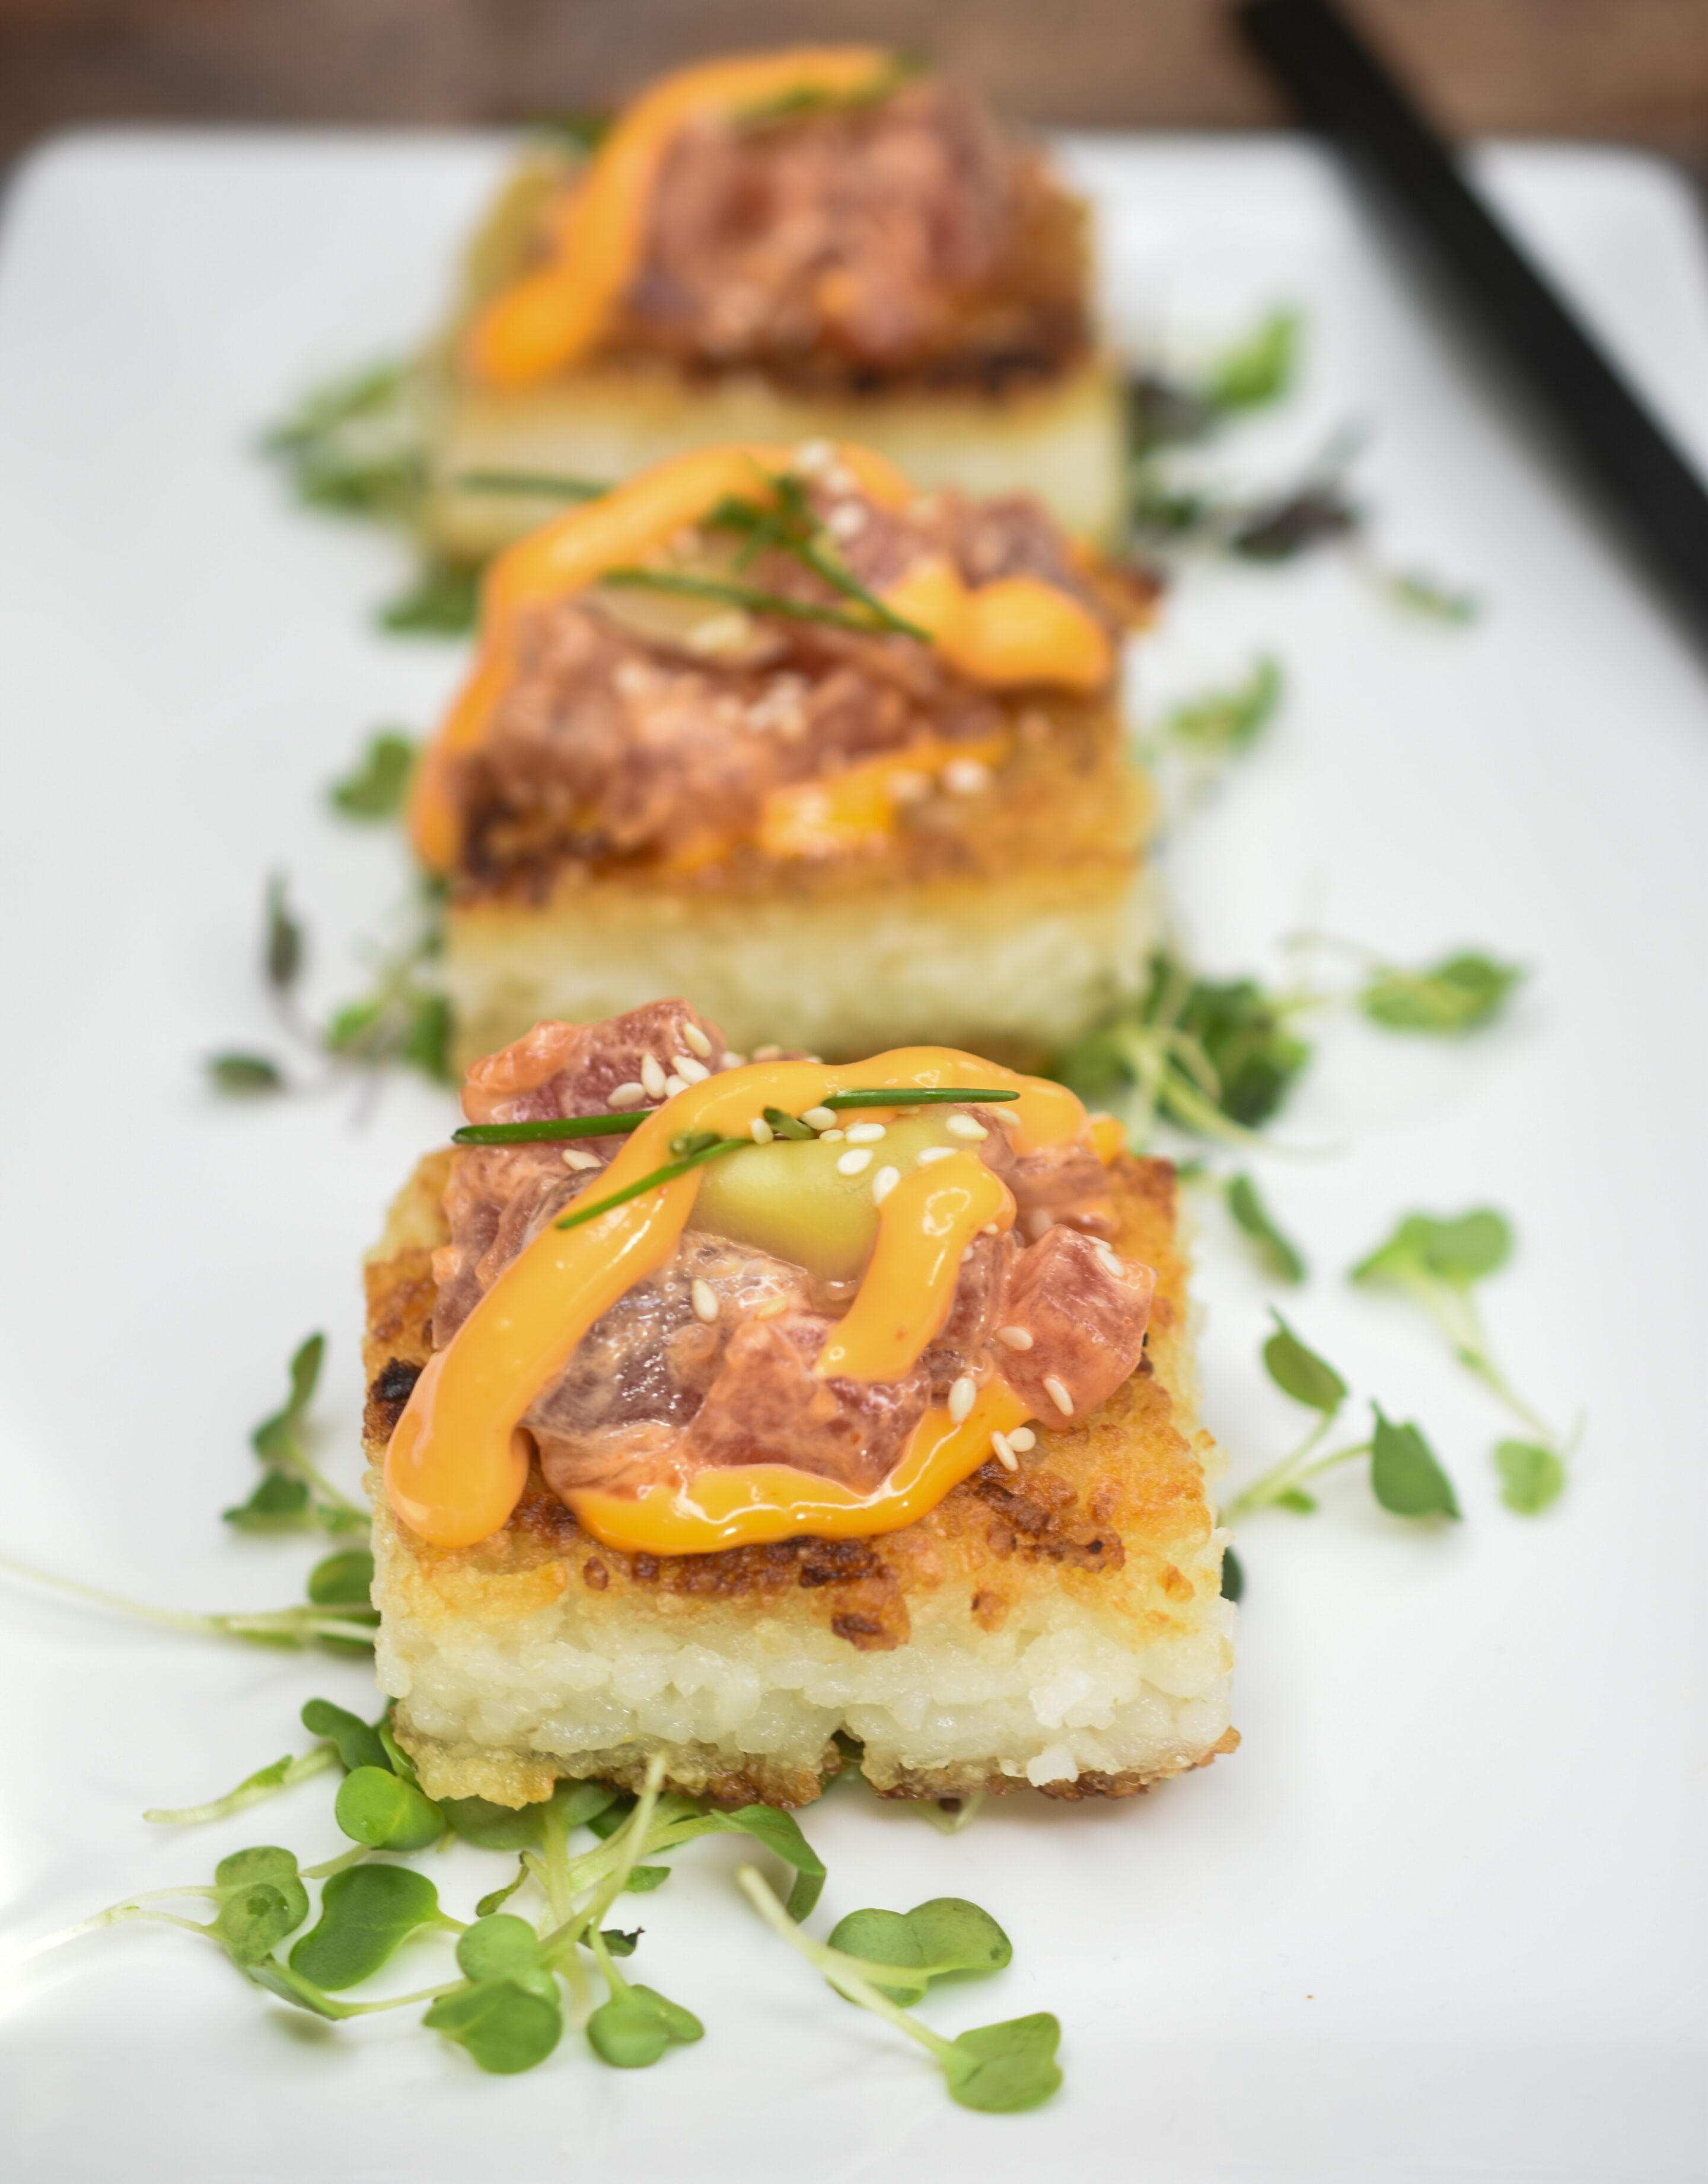 Crispy Rice with Spicy Tuna such a tasty appetizer. Inspired by the Cheesecake Spicy Tuna appetizer